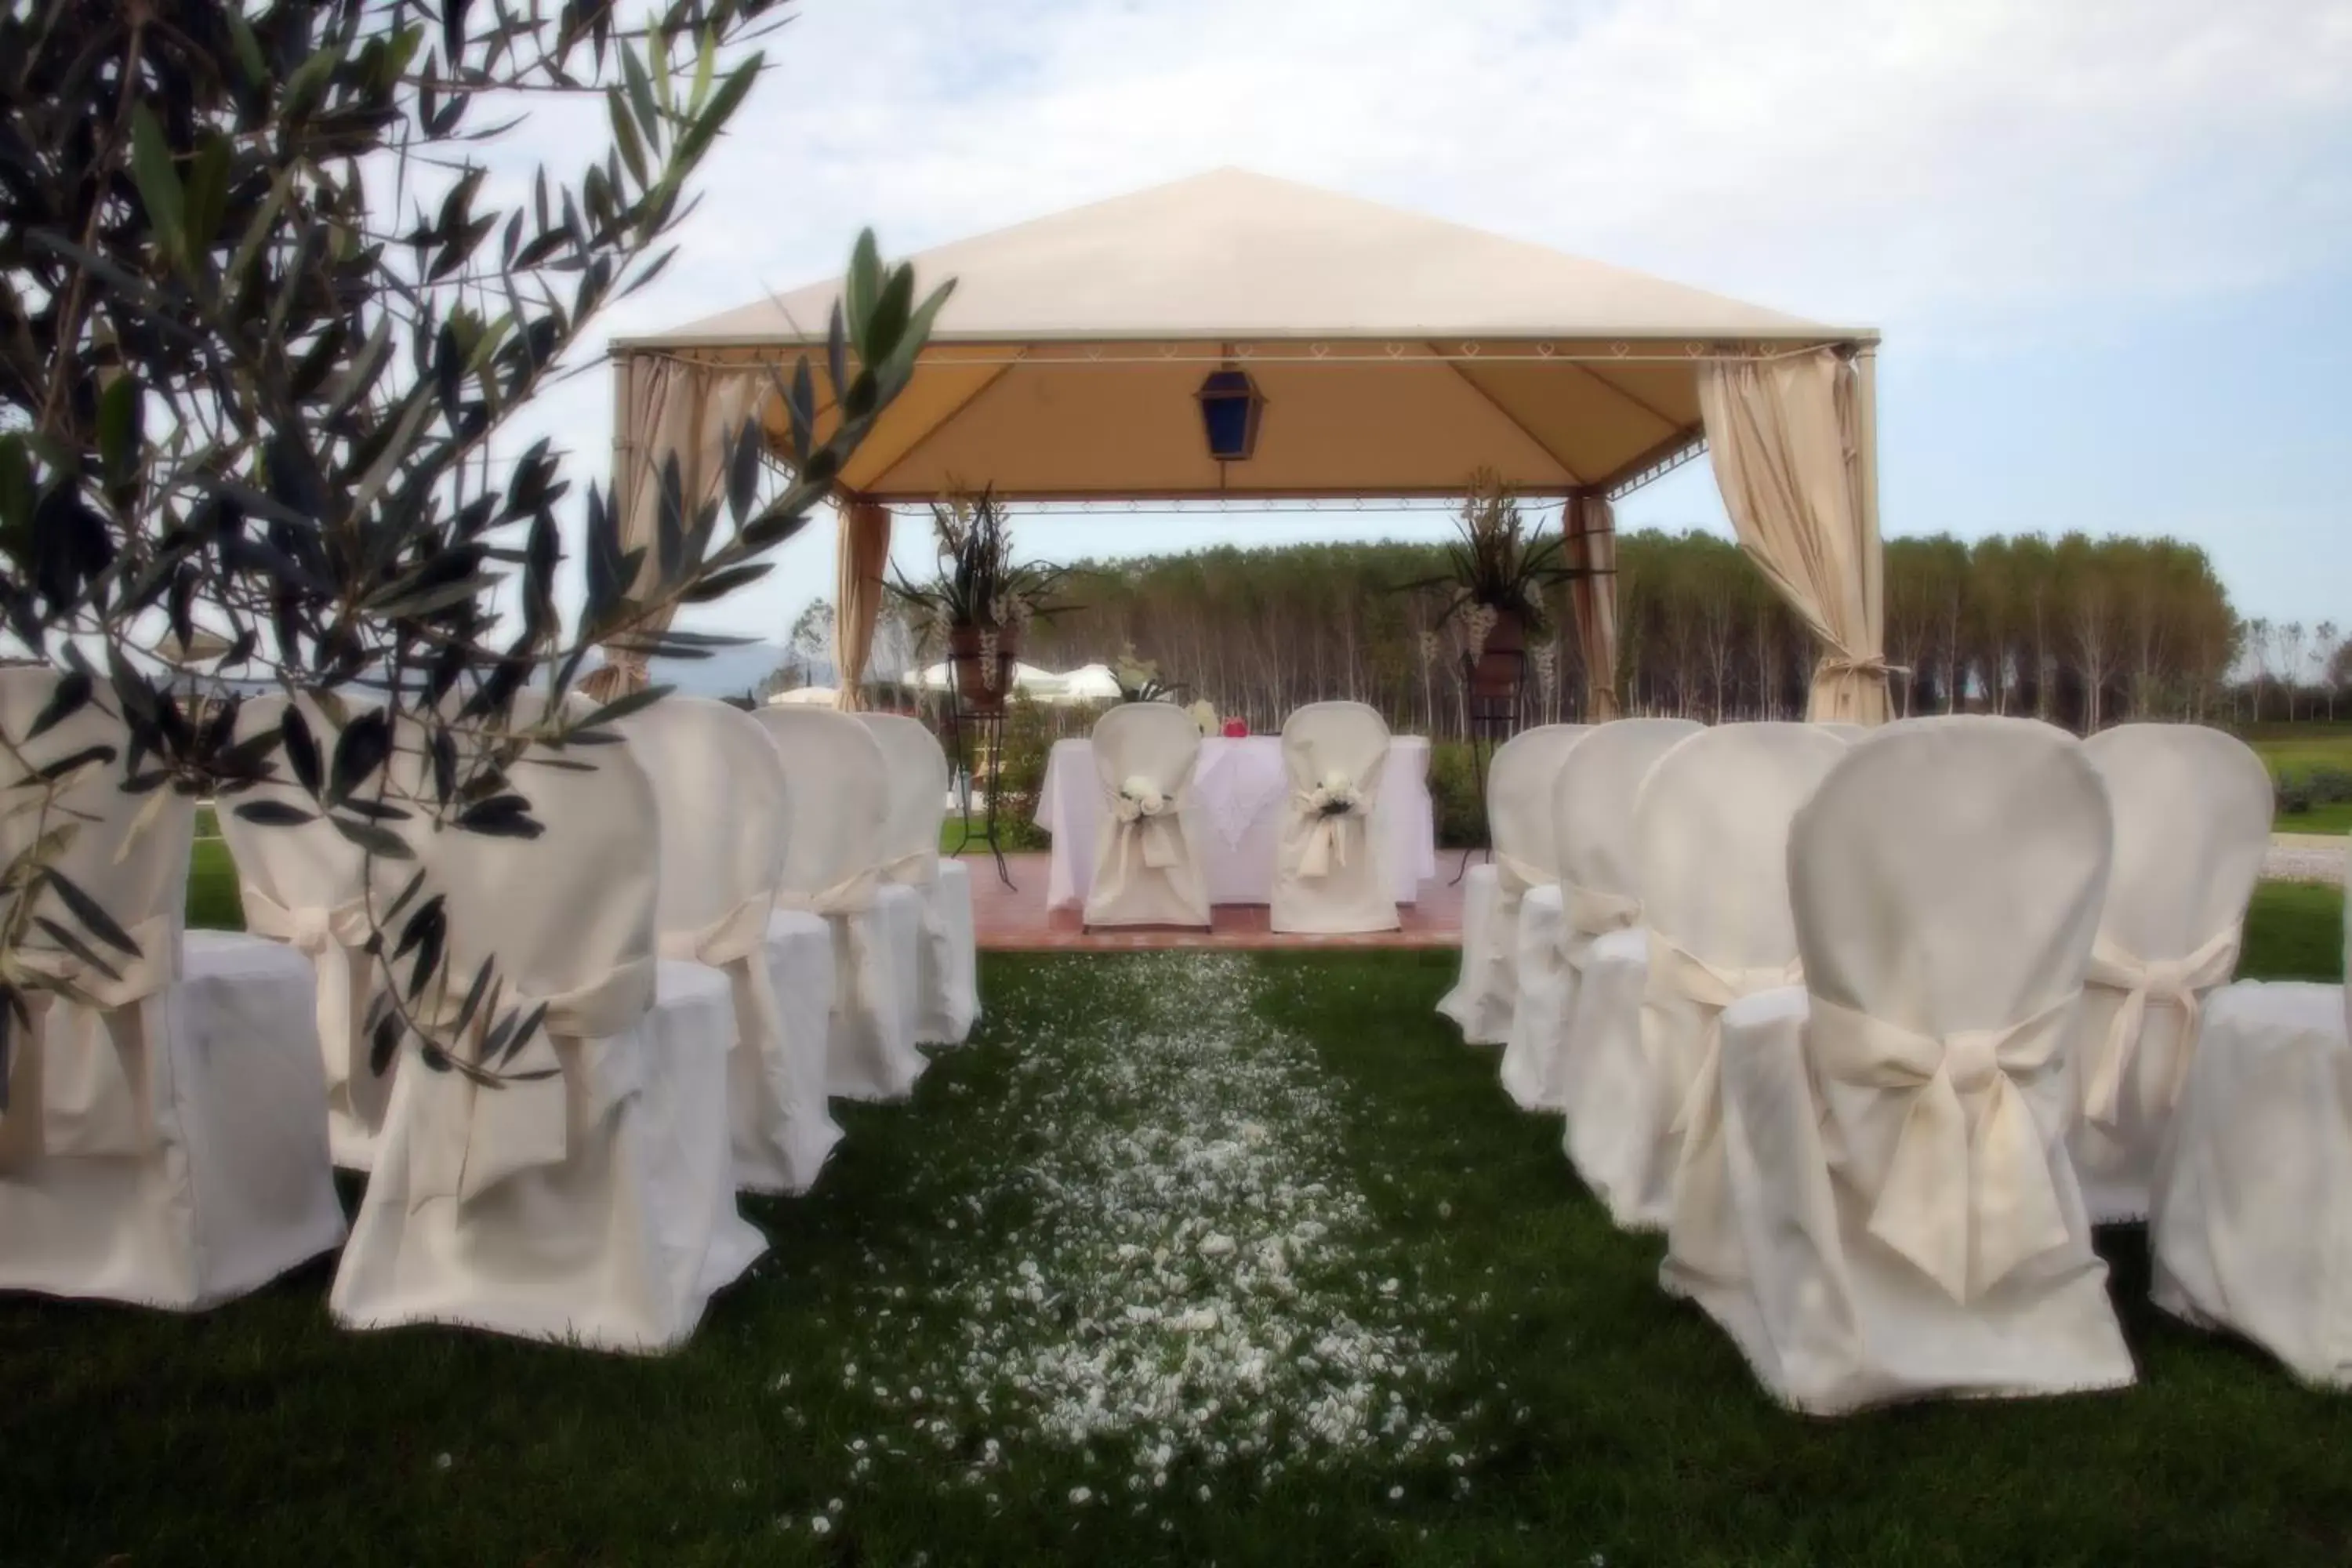 Banquet/Function facilities, Banquet Facilities in Le Colombaie Country Resort